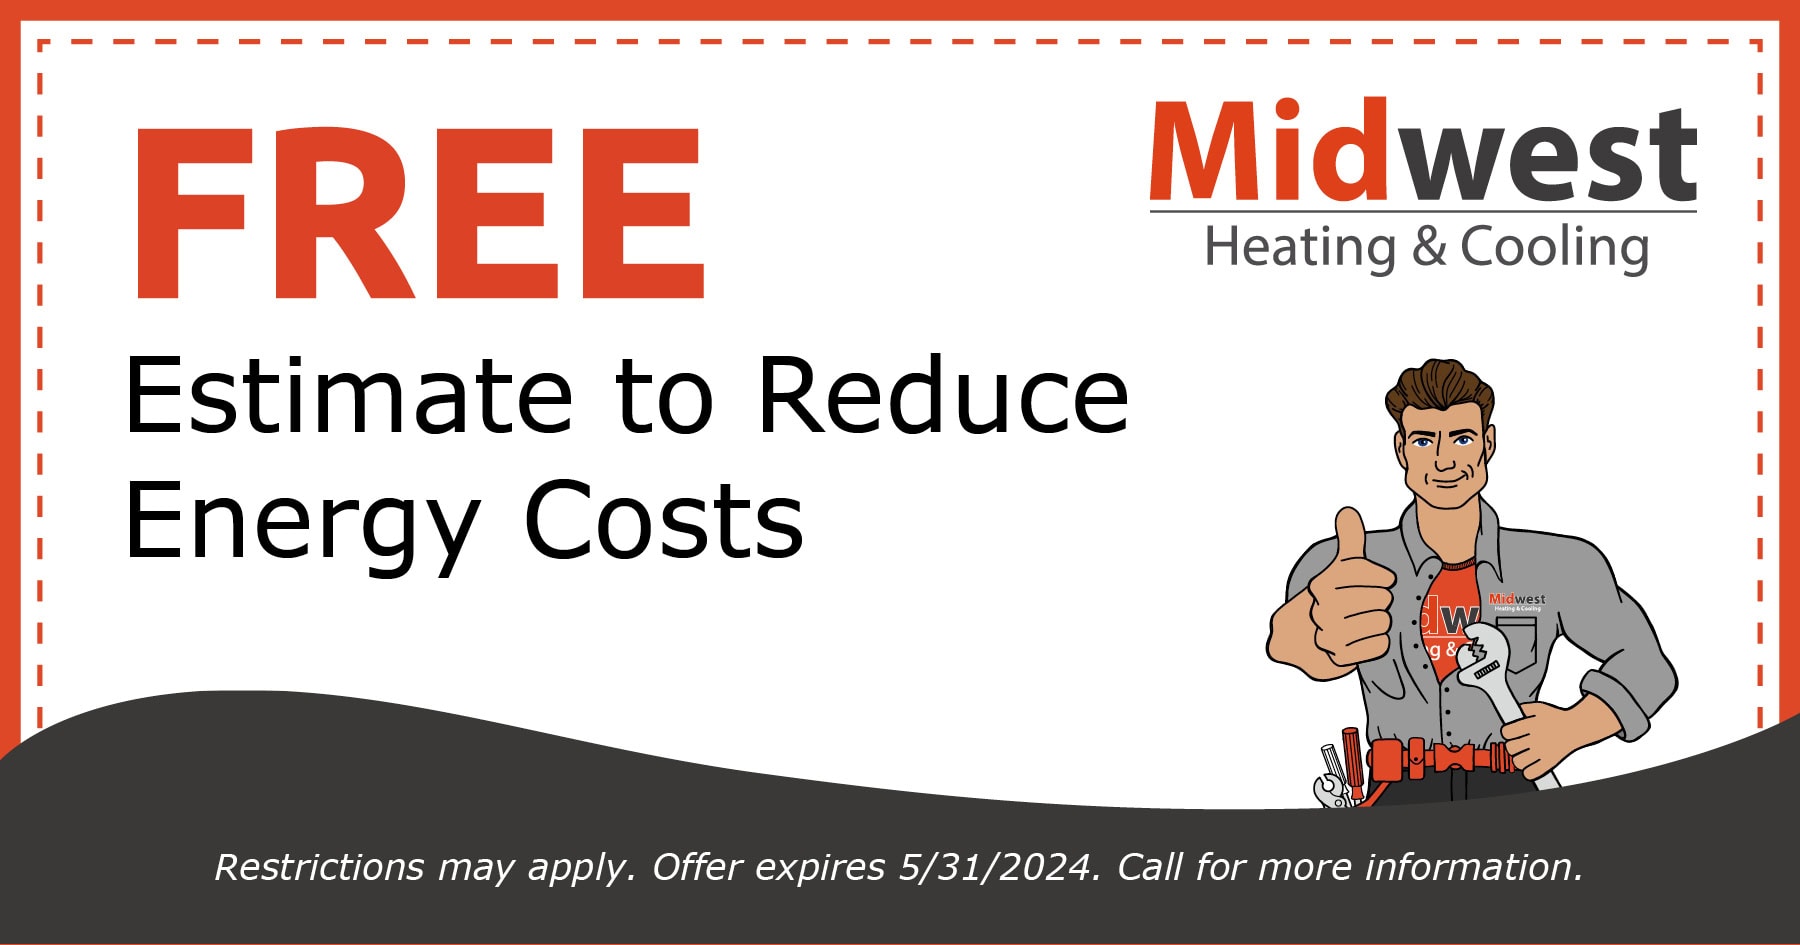 Free estimate to reduce energy costs. Restrictions apply. Contact us for details.